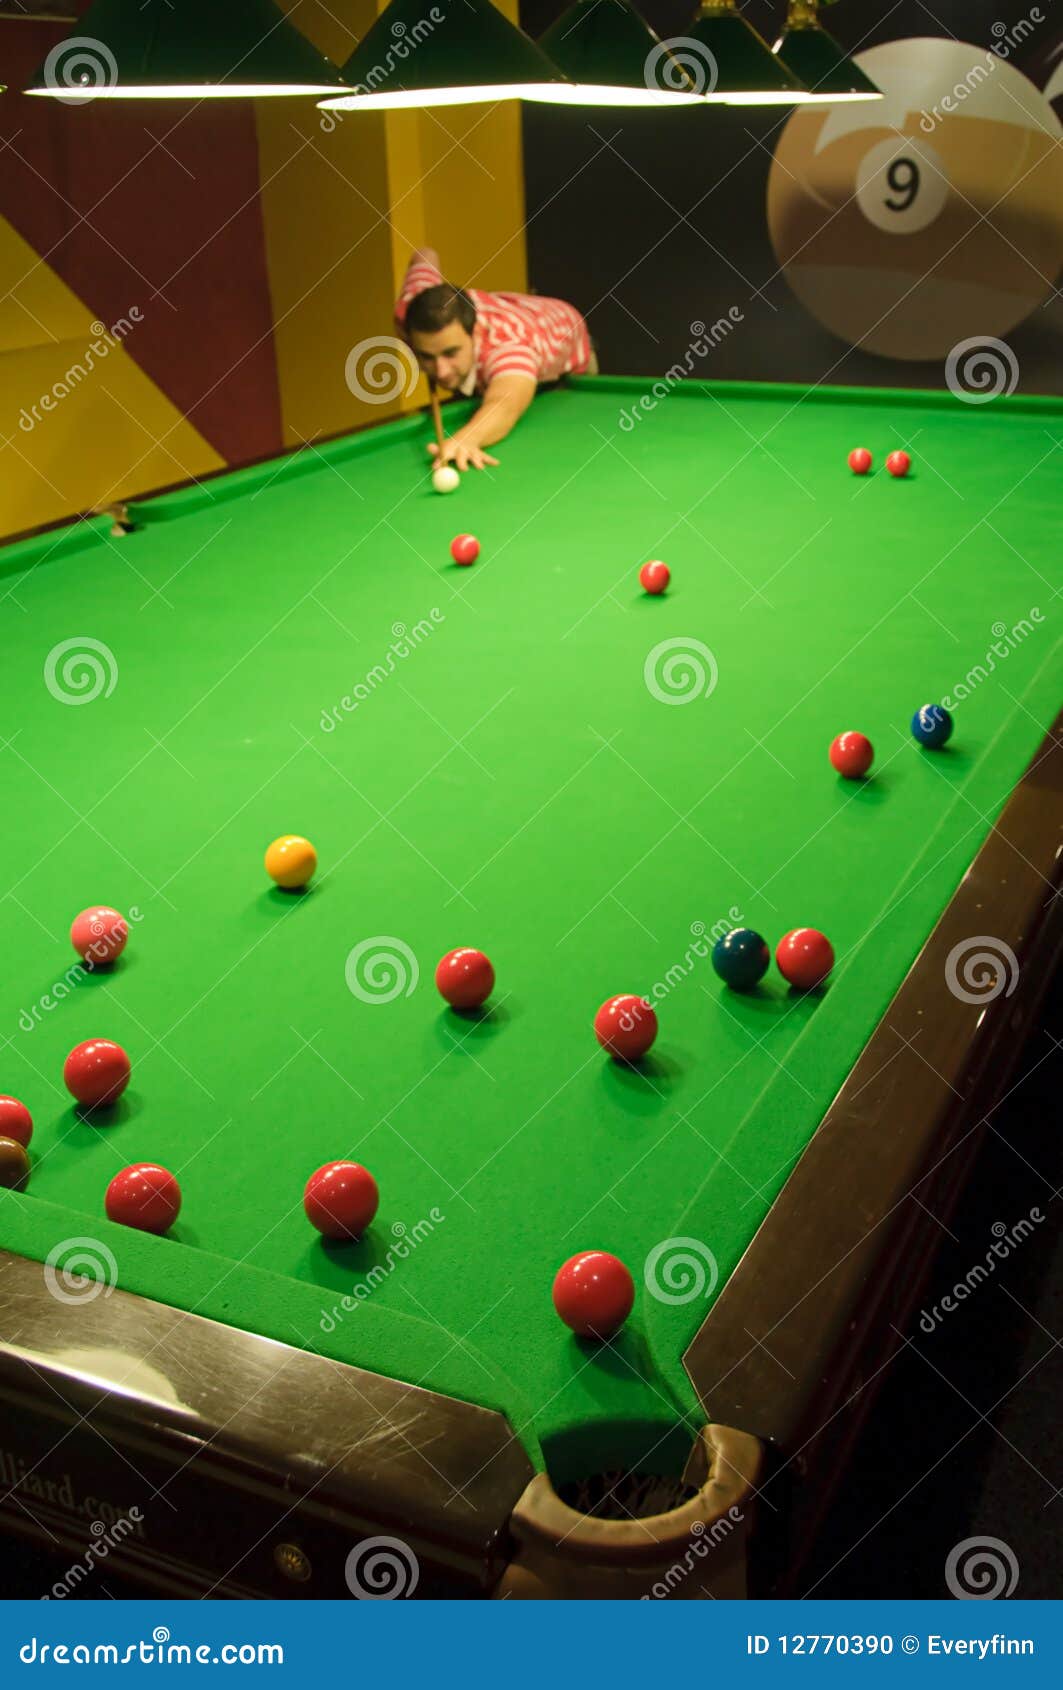 Playing snooker stock photo